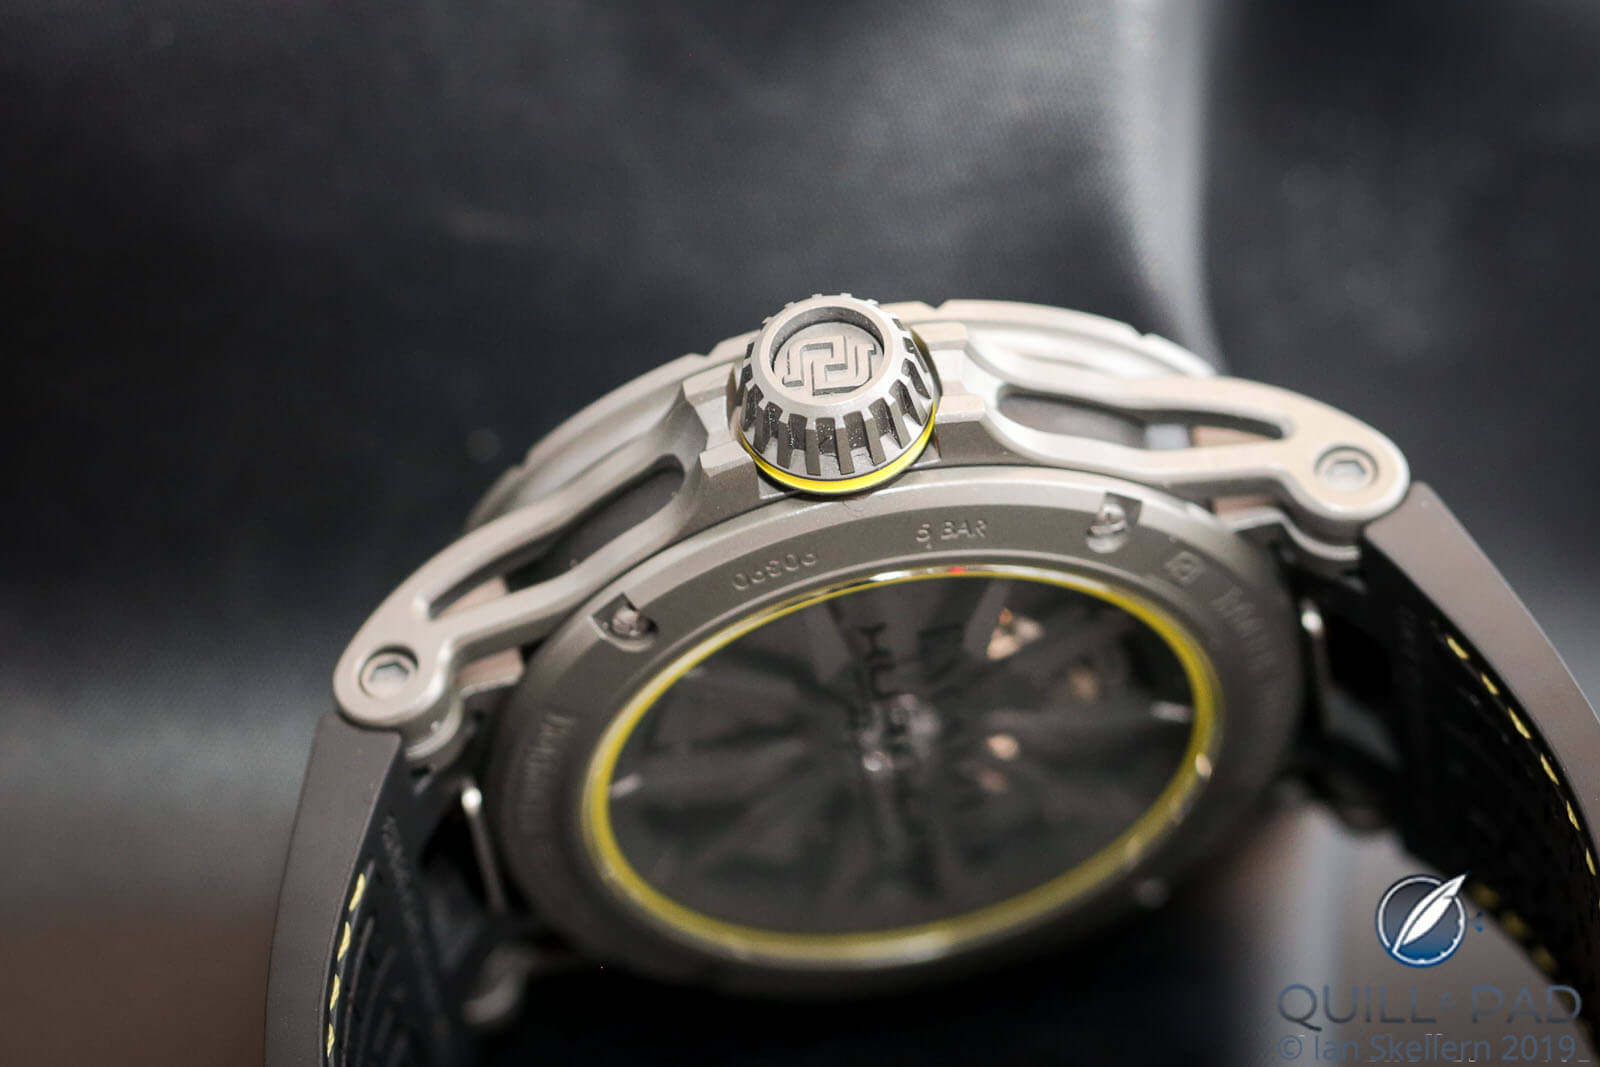 Crown of the Roger Dubuis Excalibur Huracán Performante